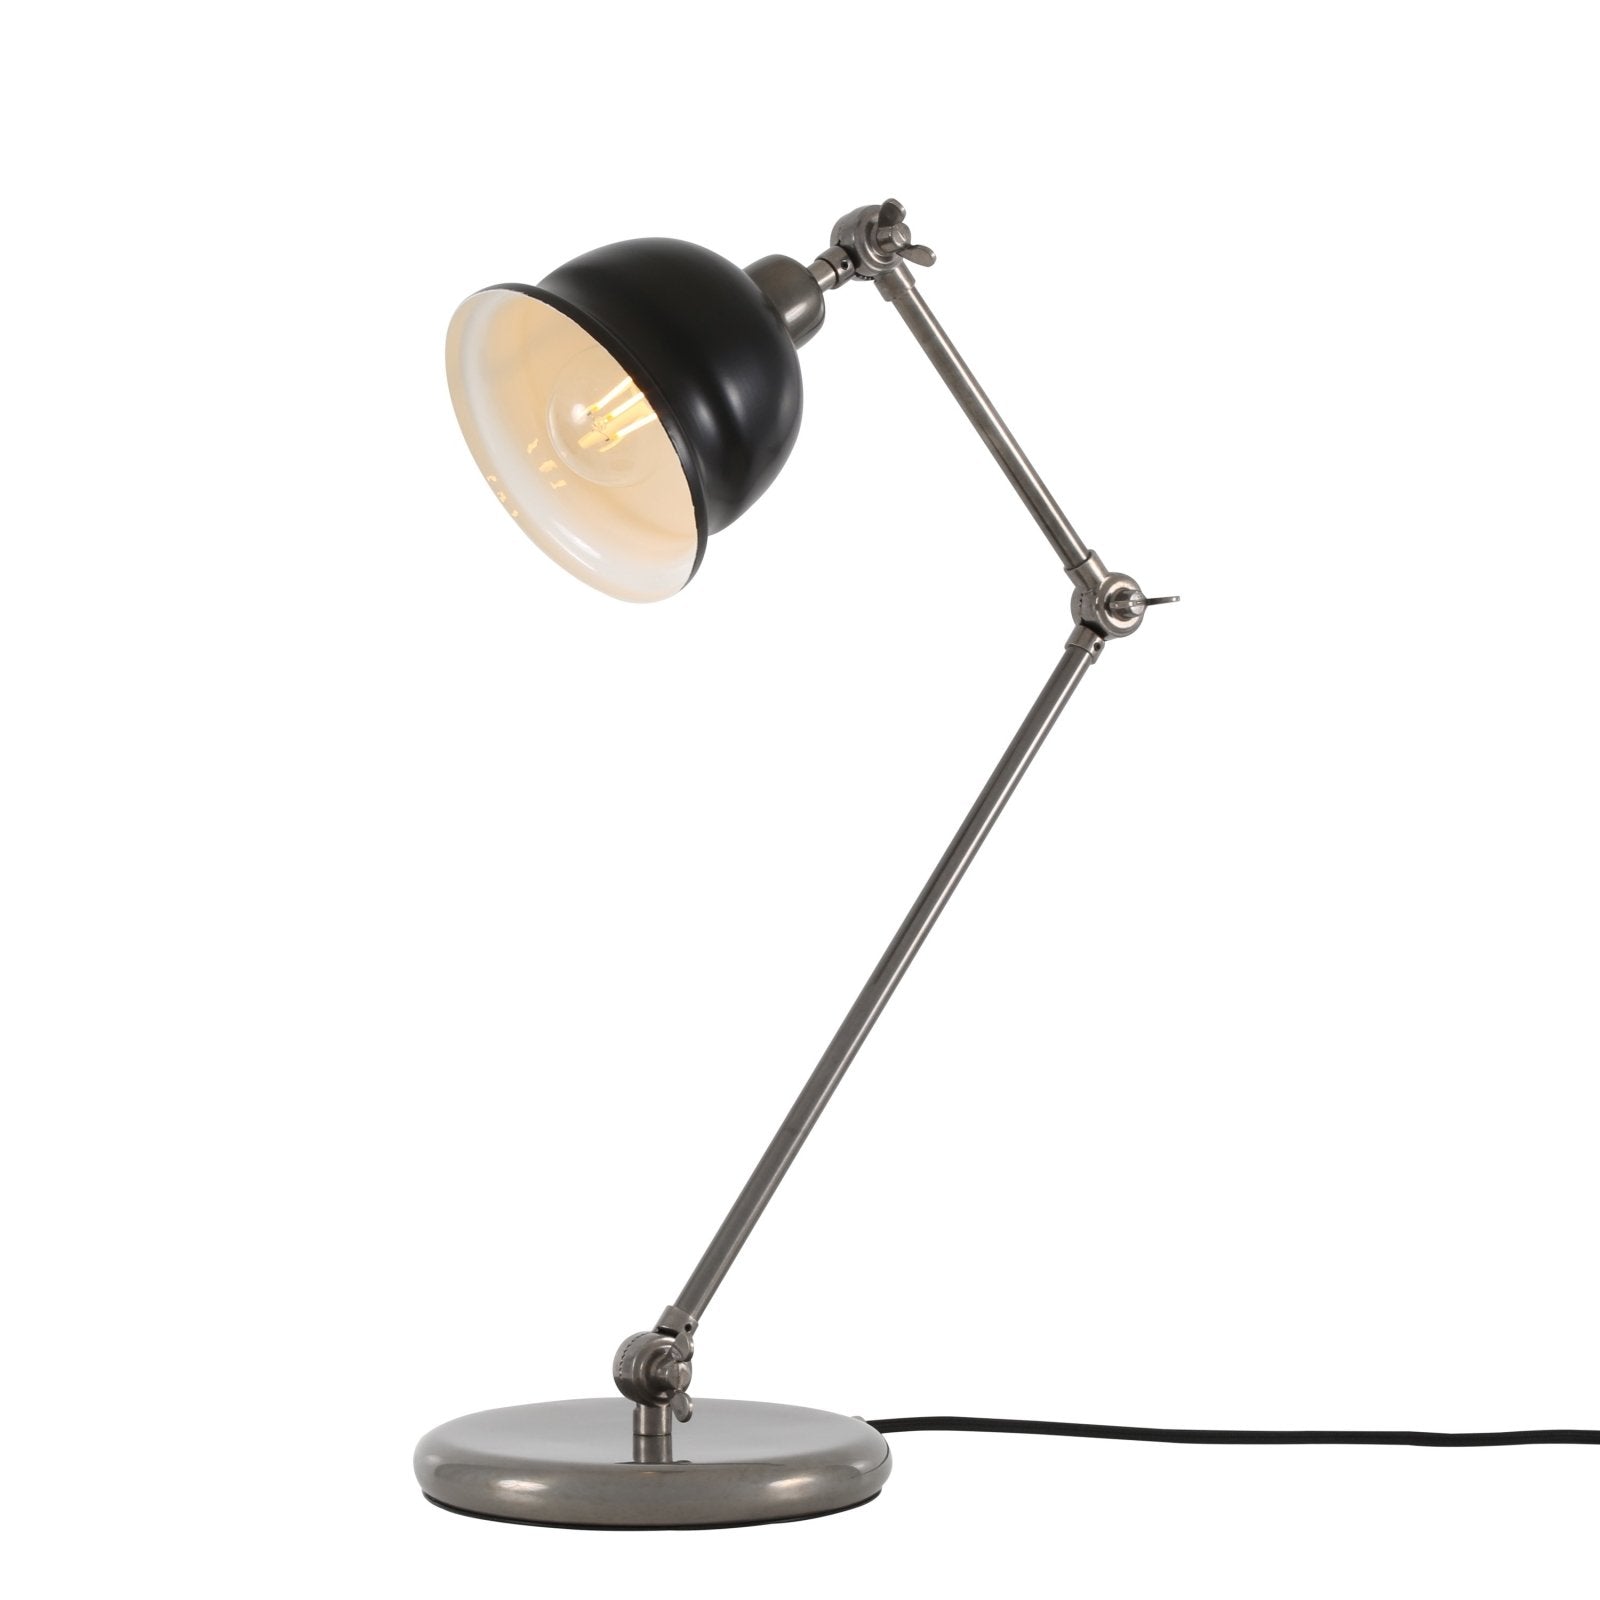 Nico Table Lamp - Table Lamps from RETROLIGHT. Made by Mullan Lighting.